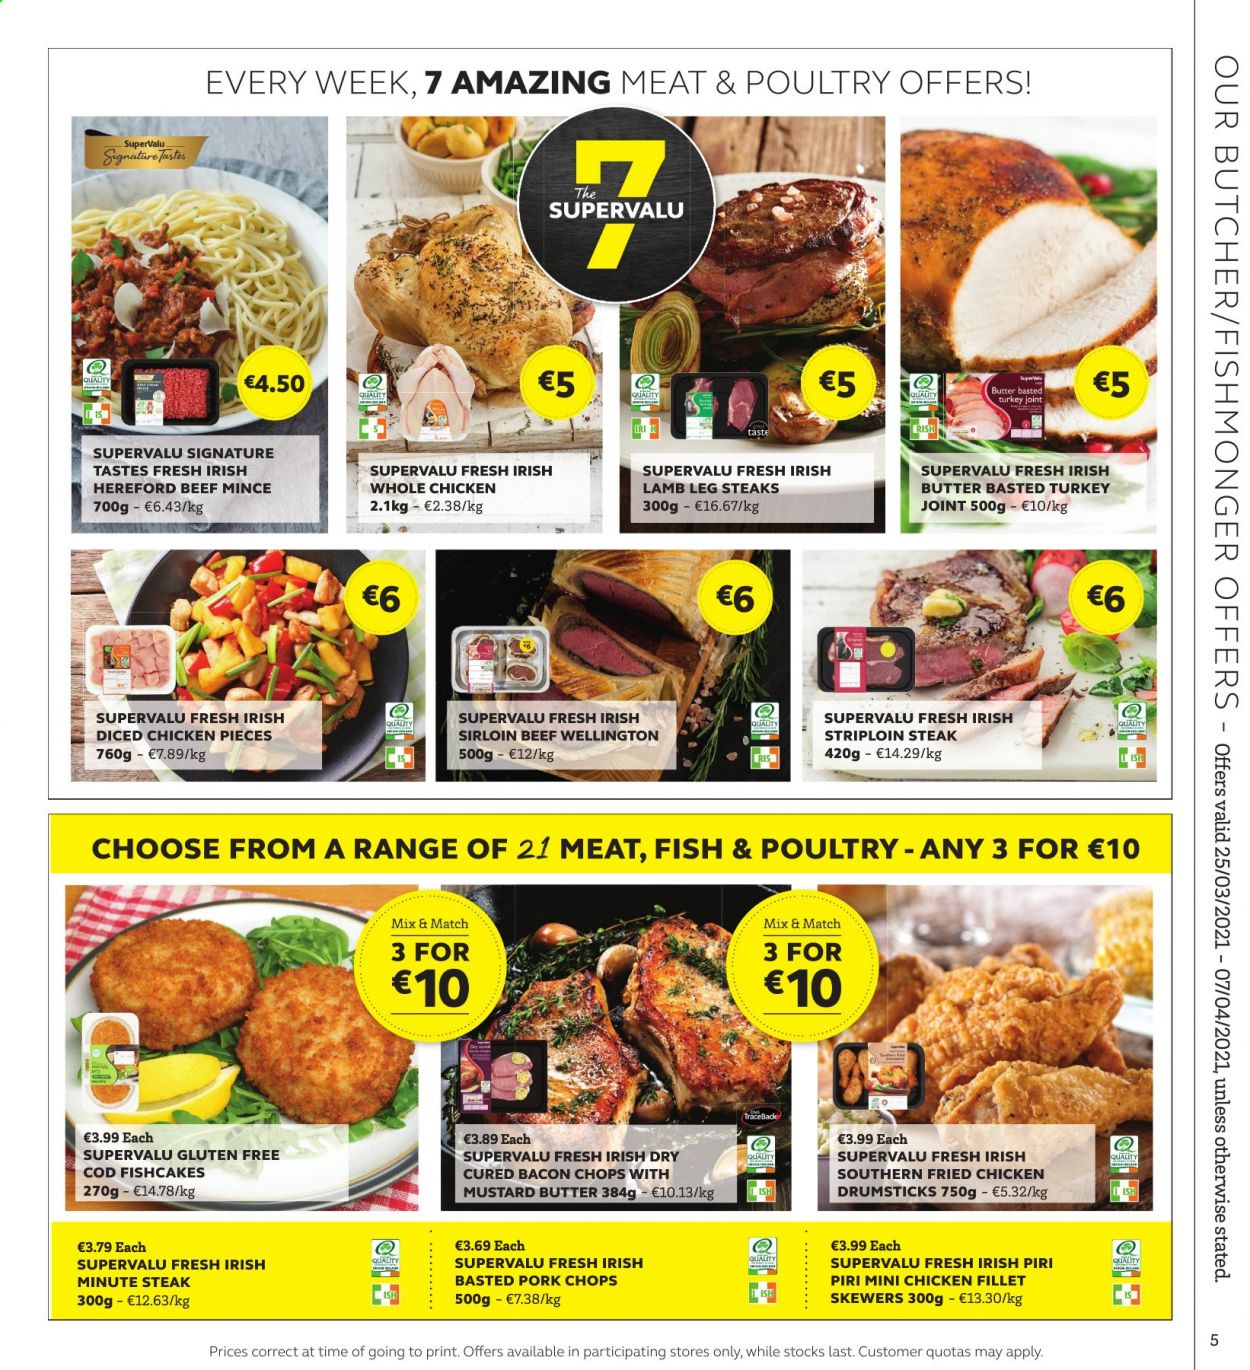 thumbnail - SuperValu offer  - 25.03.2021 - 07.04.2021 - Sales products - cod, fish, Fishmonger, fried chicken, bacon, butter, fish cake, mustard, whole chicken, beef meat, ground beef, steak, striploin steak, pork chops, pork meat, lamb meat, lamb leg. Page 5.